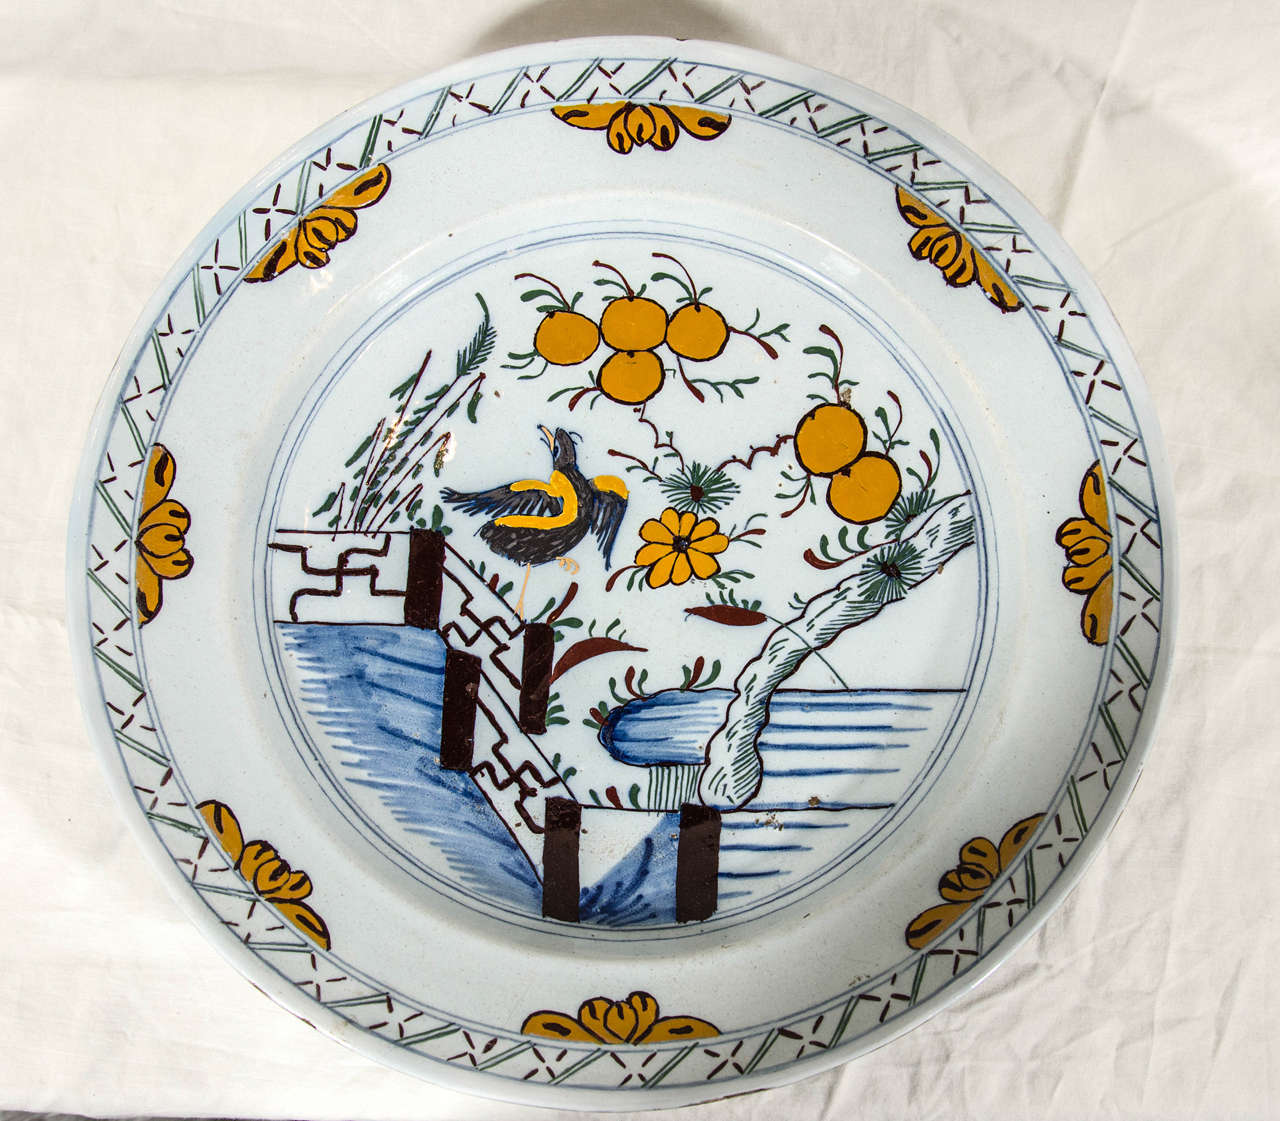 A polychrome Dutch Delft charger with a whimsical scene of a bird dancing under an orange tree. The elements of the design are derived from Chinese porcelain, but the presentation is completely original.